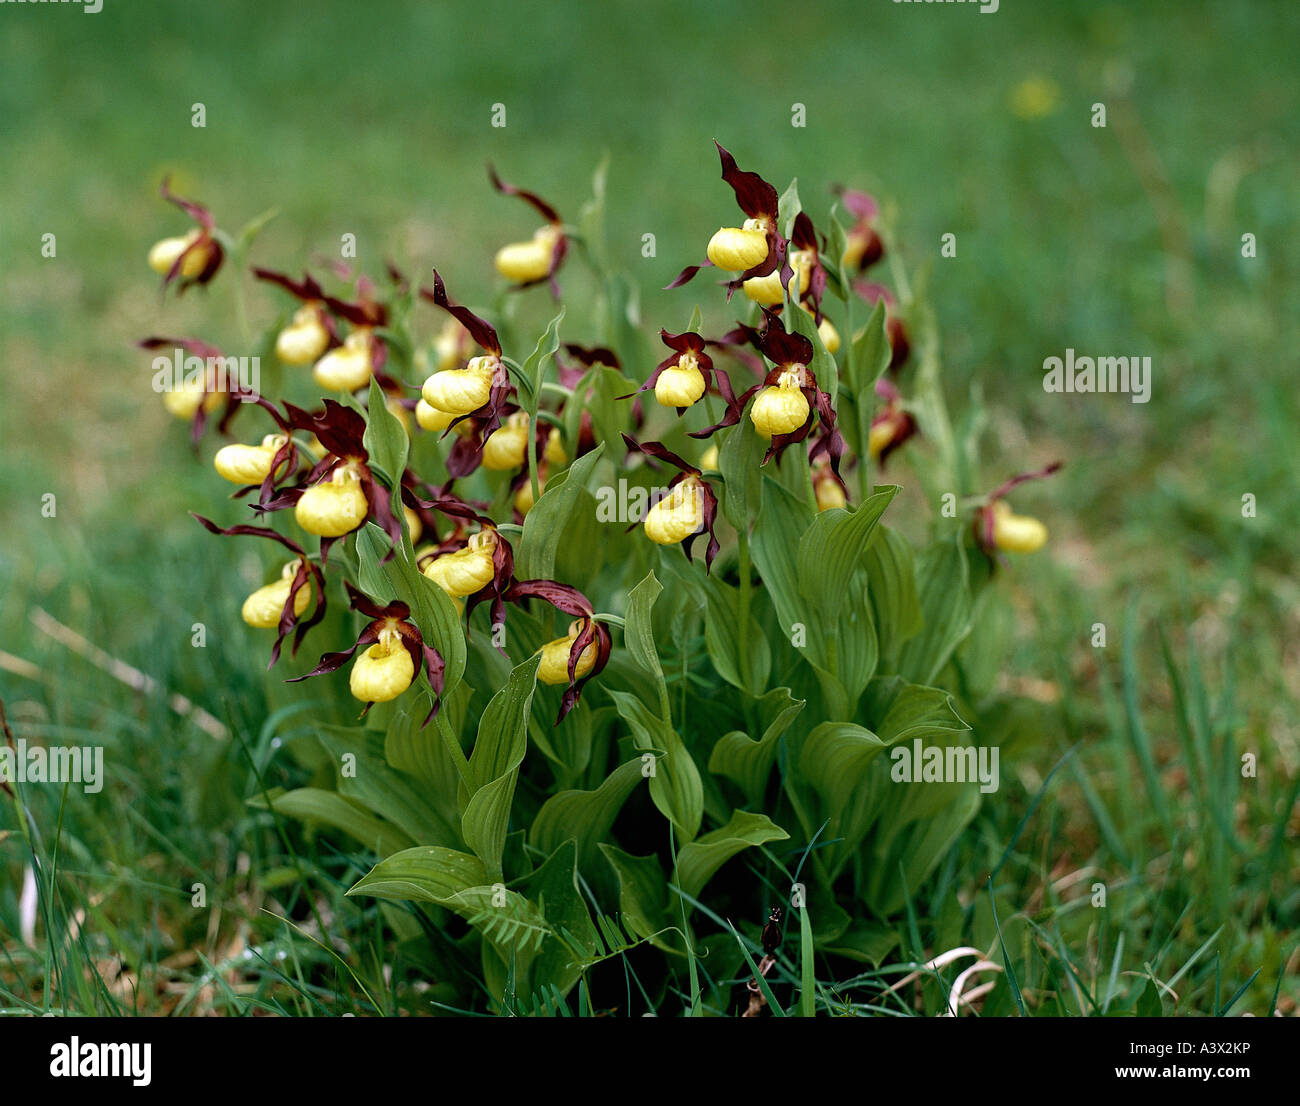 botany, Lady's Slippers, (Cypripedium), species, Nerve root, (Cypripedium calceolus), blossoms, at shoot, in meadow, growing, ye Stock Photo